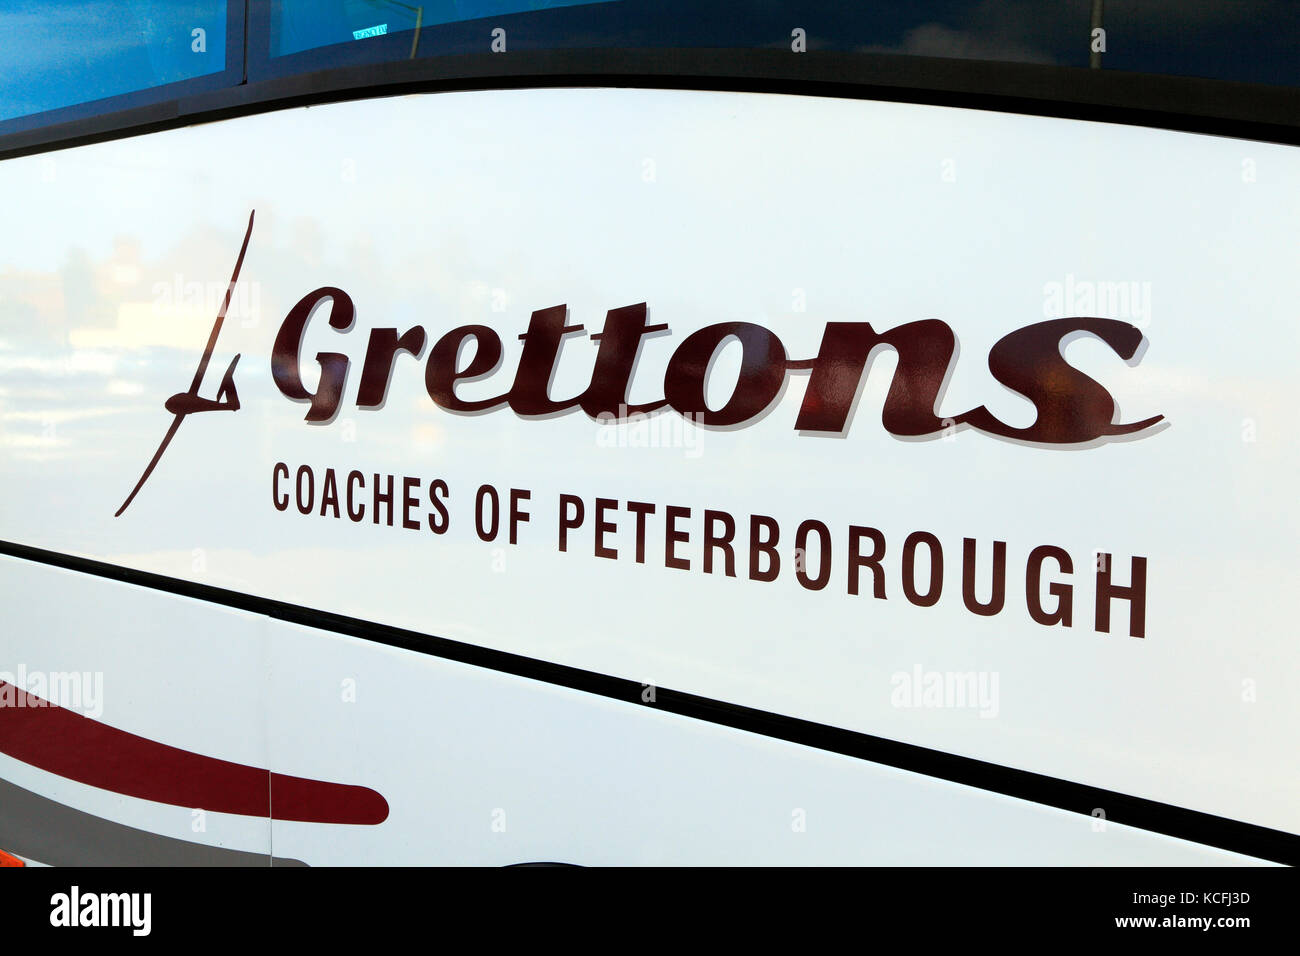 Grettons Coaches,  of Peterborough, coach, daytrips, trip, excursions, excursion, holidays, holiday, travel company, companies, transport, bus Stock Photo